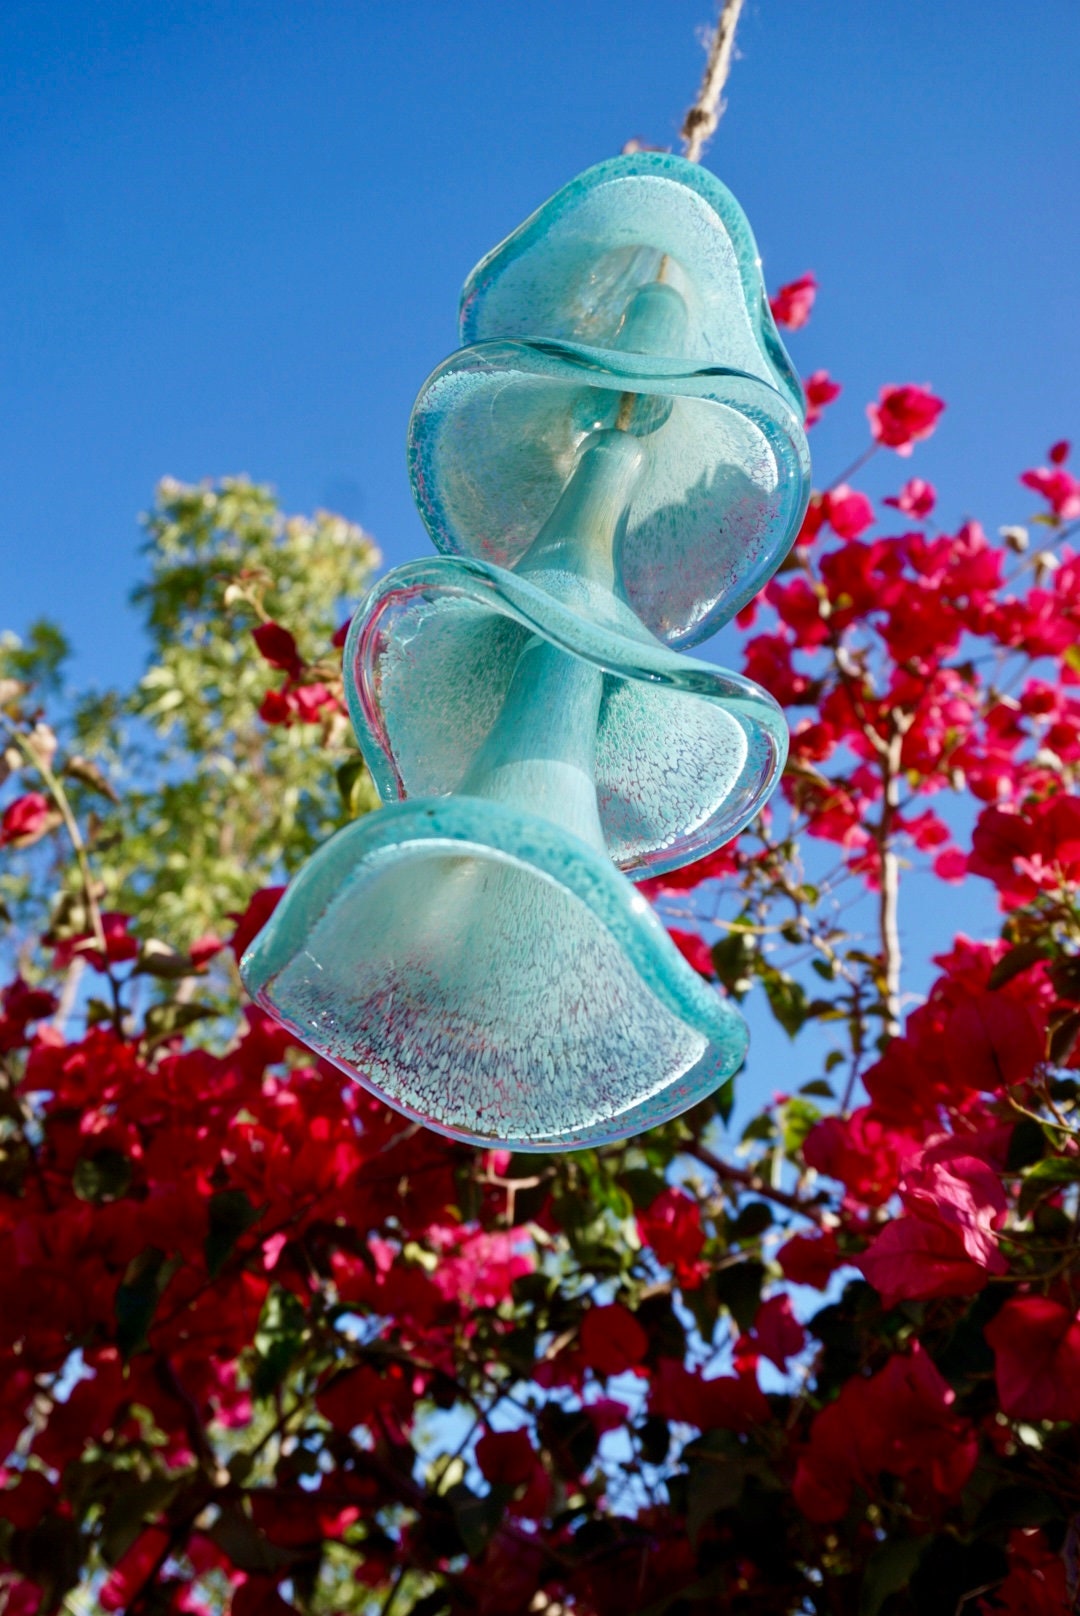 Free US Shipping-Handmade Art Glass Petunia Flower Holiday Gift Hanging Decor Wind Chimes Sun Catcher /  Baby Blue with Silver